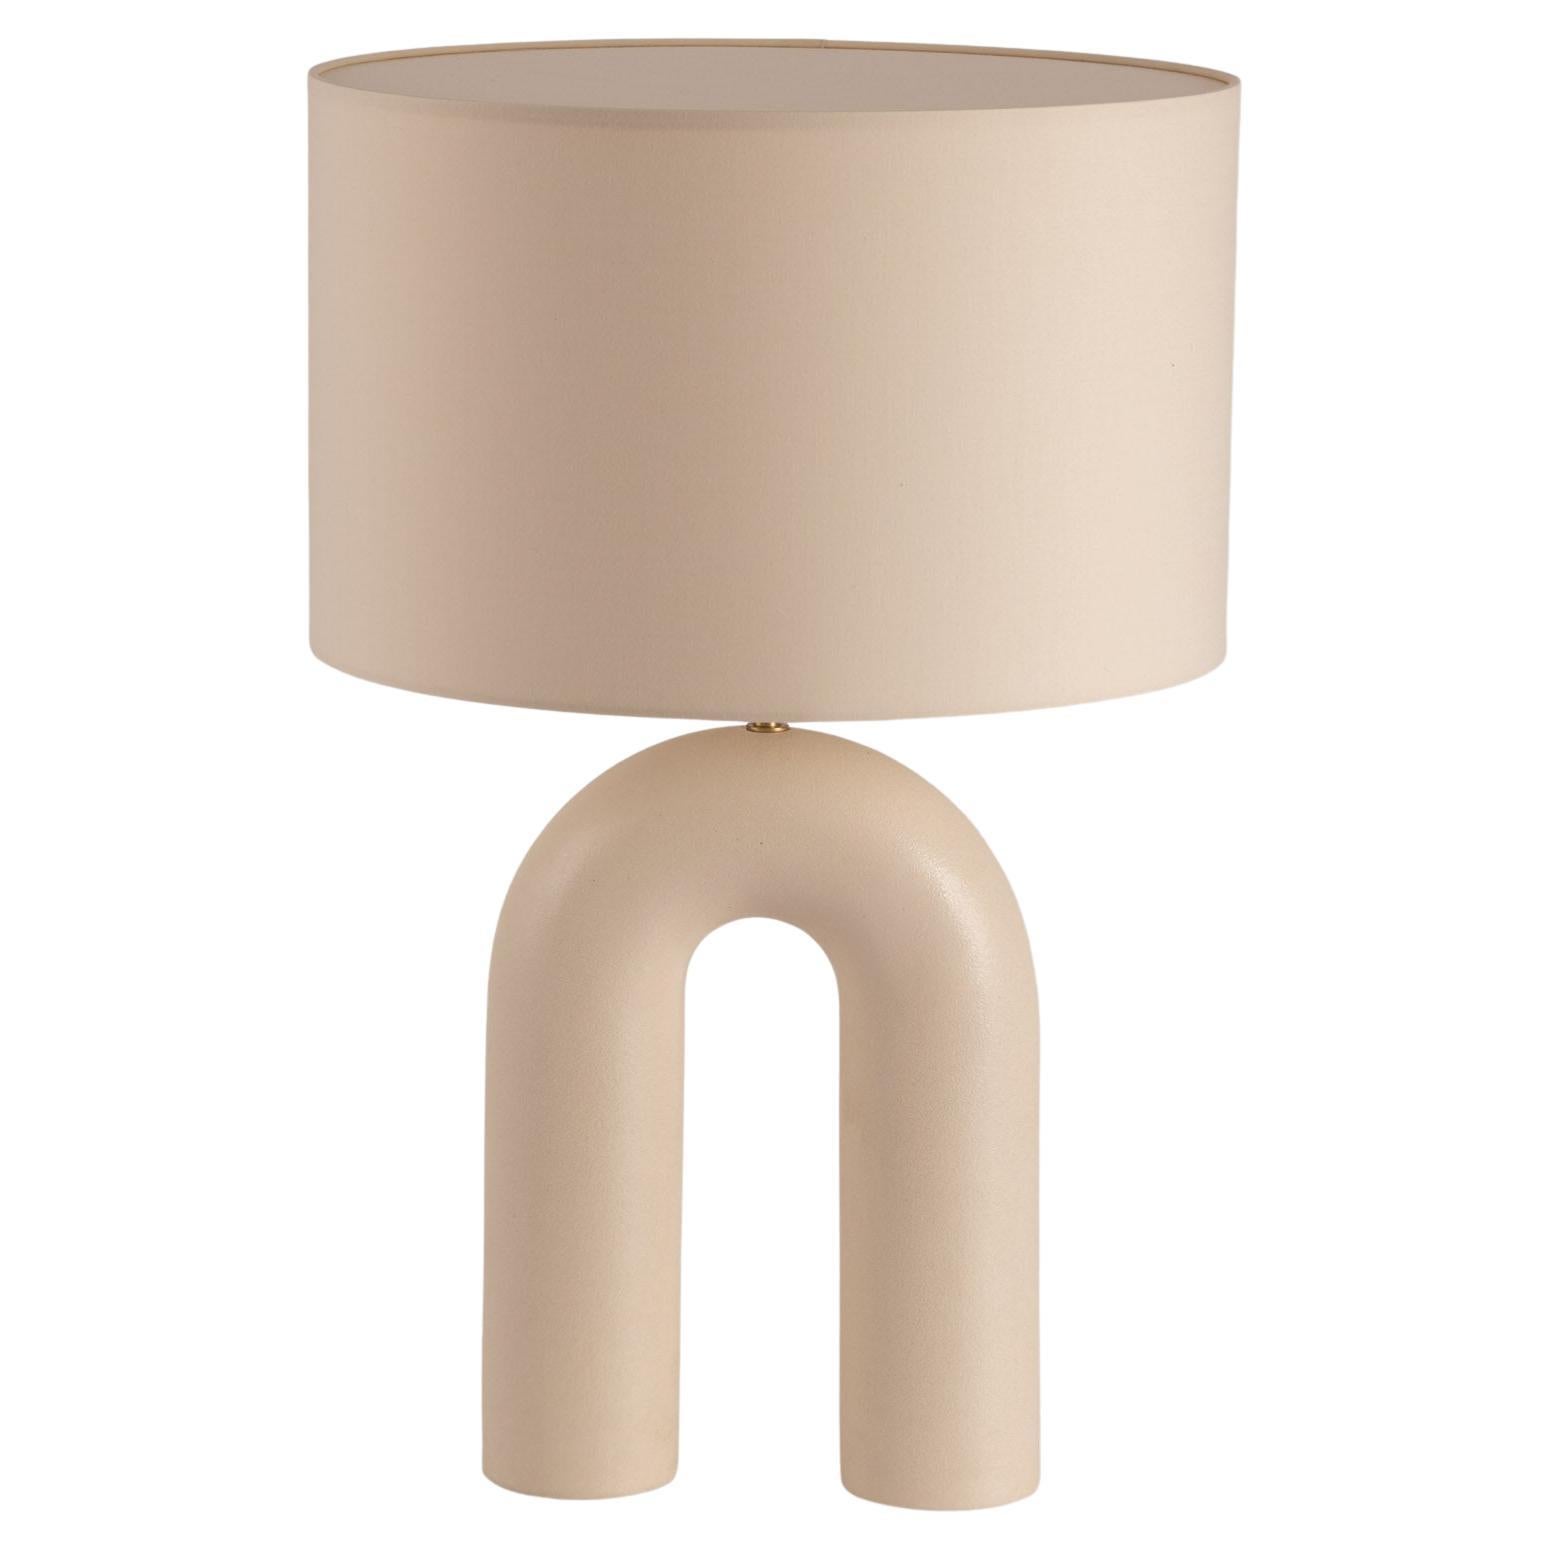 Ecru Ceramic Arko Table Lamp with Beige Lampshade by Simone & Marcel For Sale